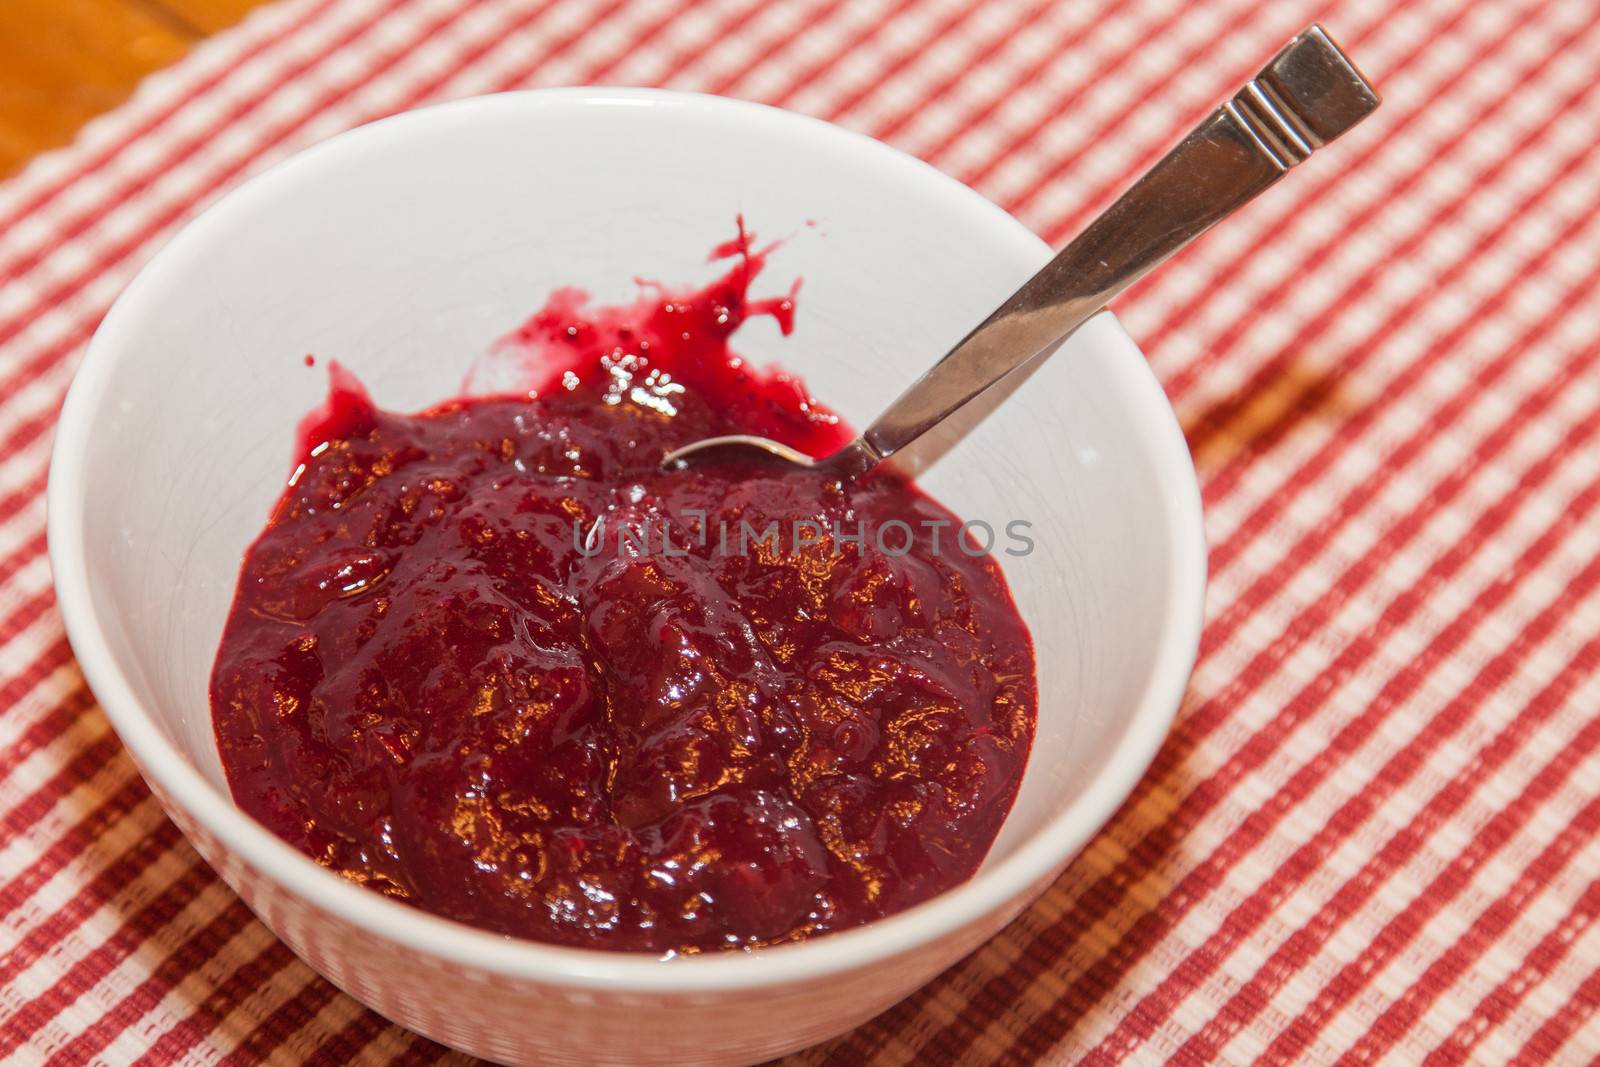 Cranberry sauce by melastmohican